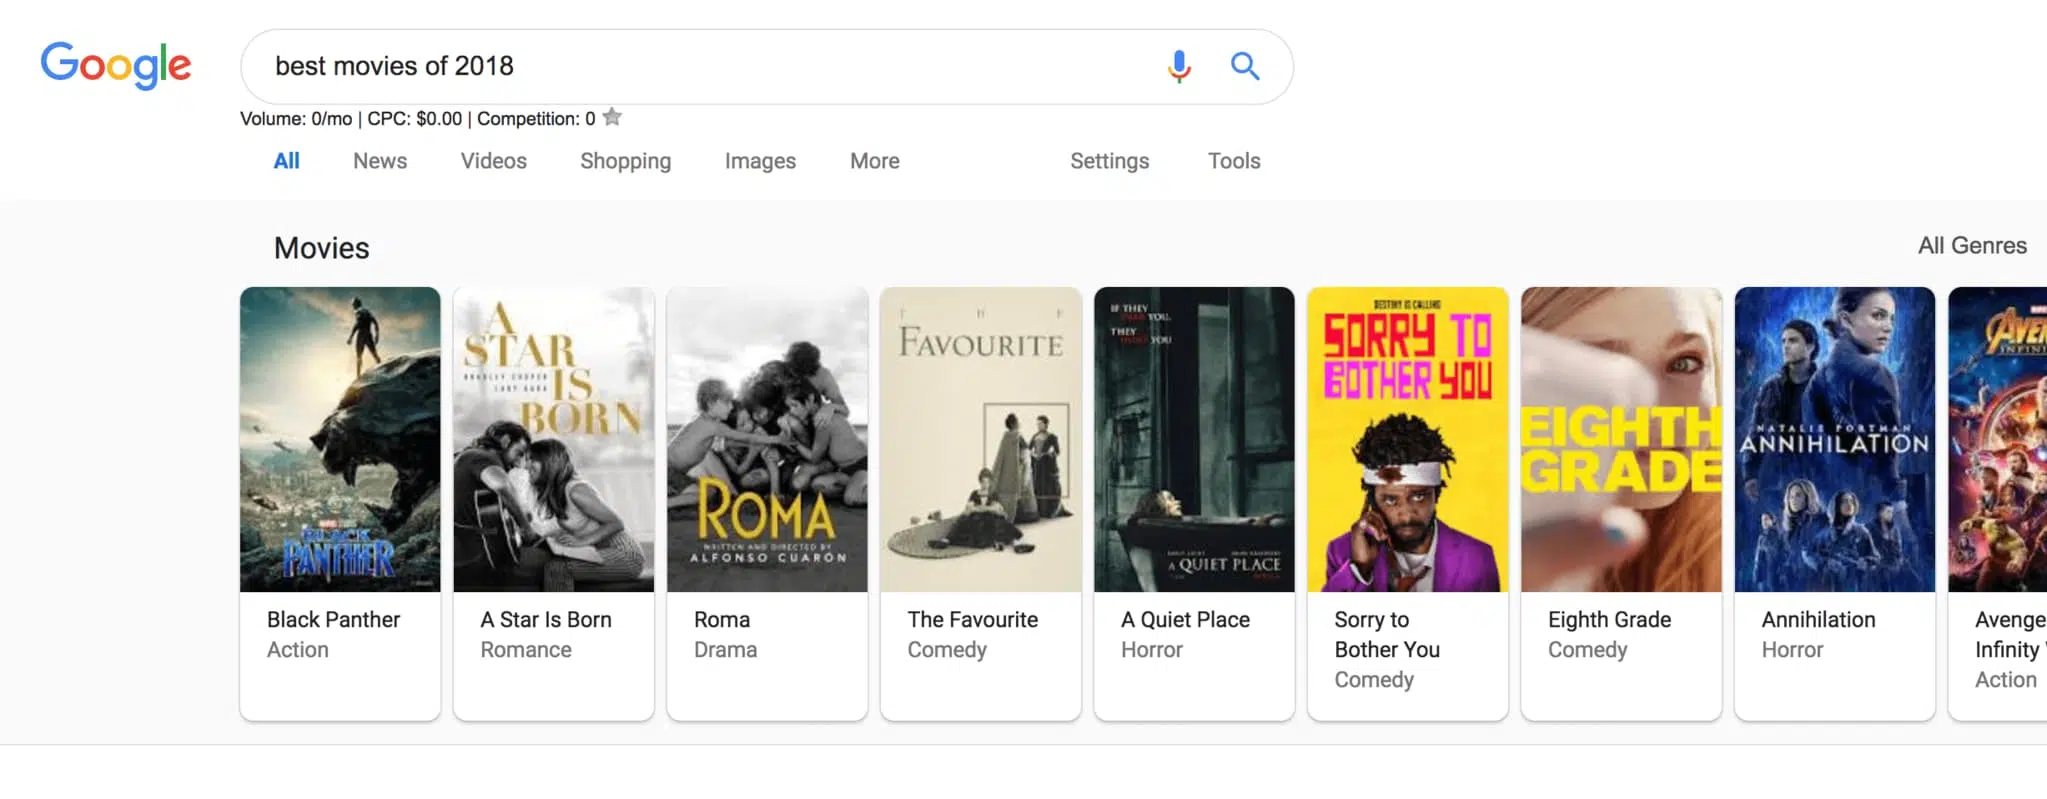 knowledge graph showcasing movies of 2018 in google SERPs